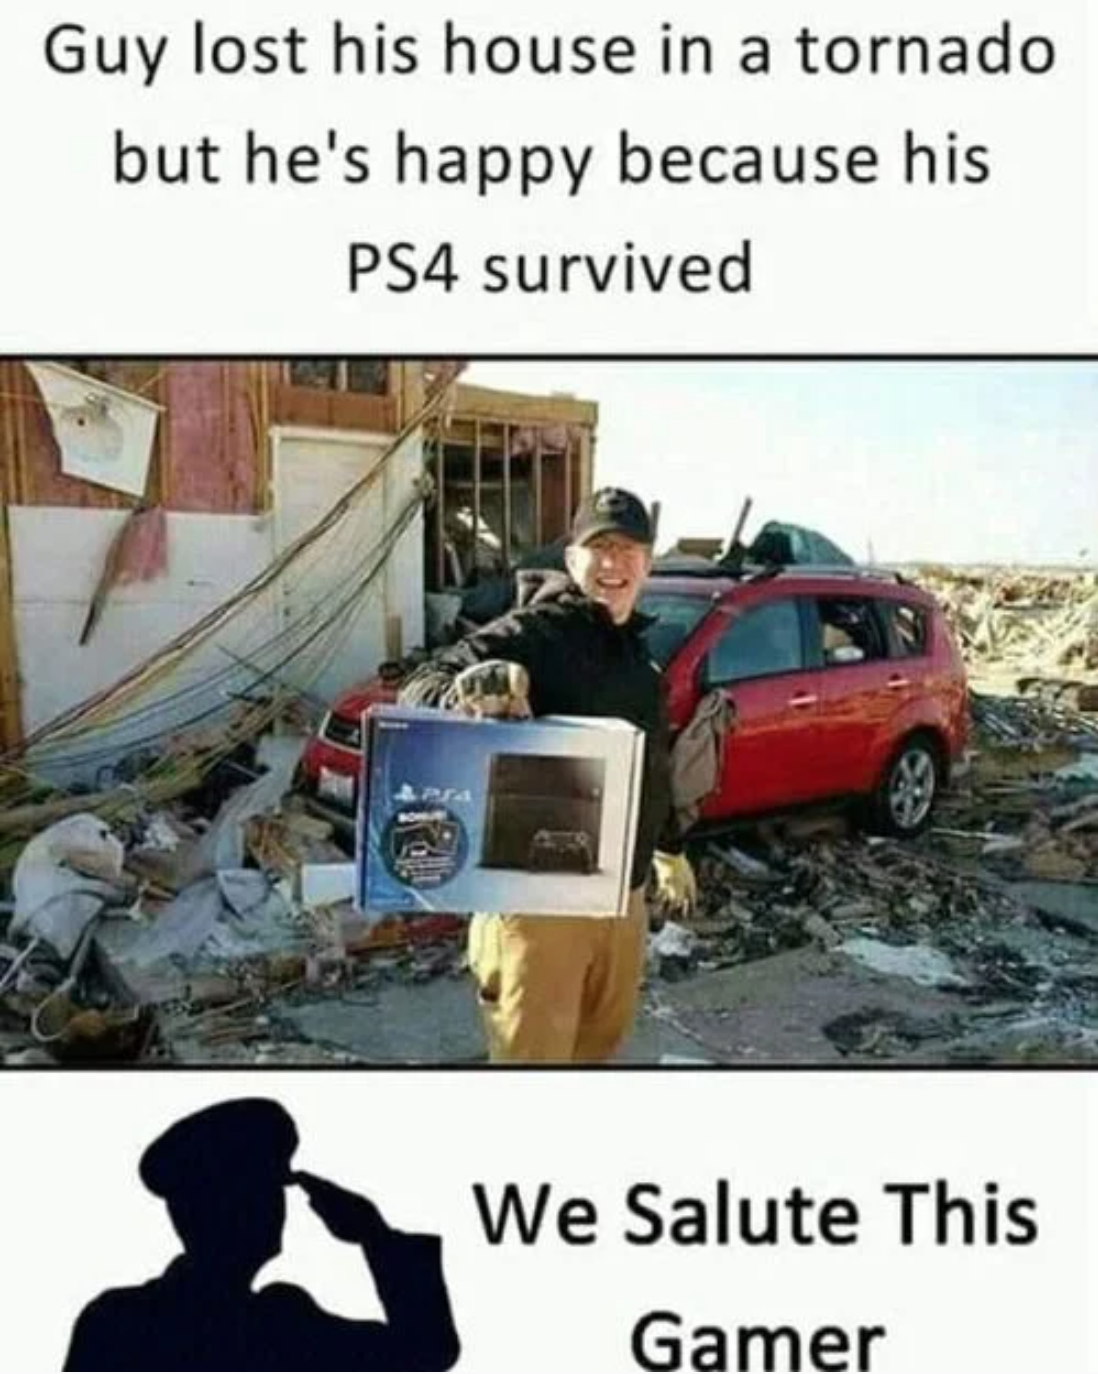 funny gaming memes - Humour - Guy lost his house in a tornado but he's happy because his PS4 survived We Salute This Gamer